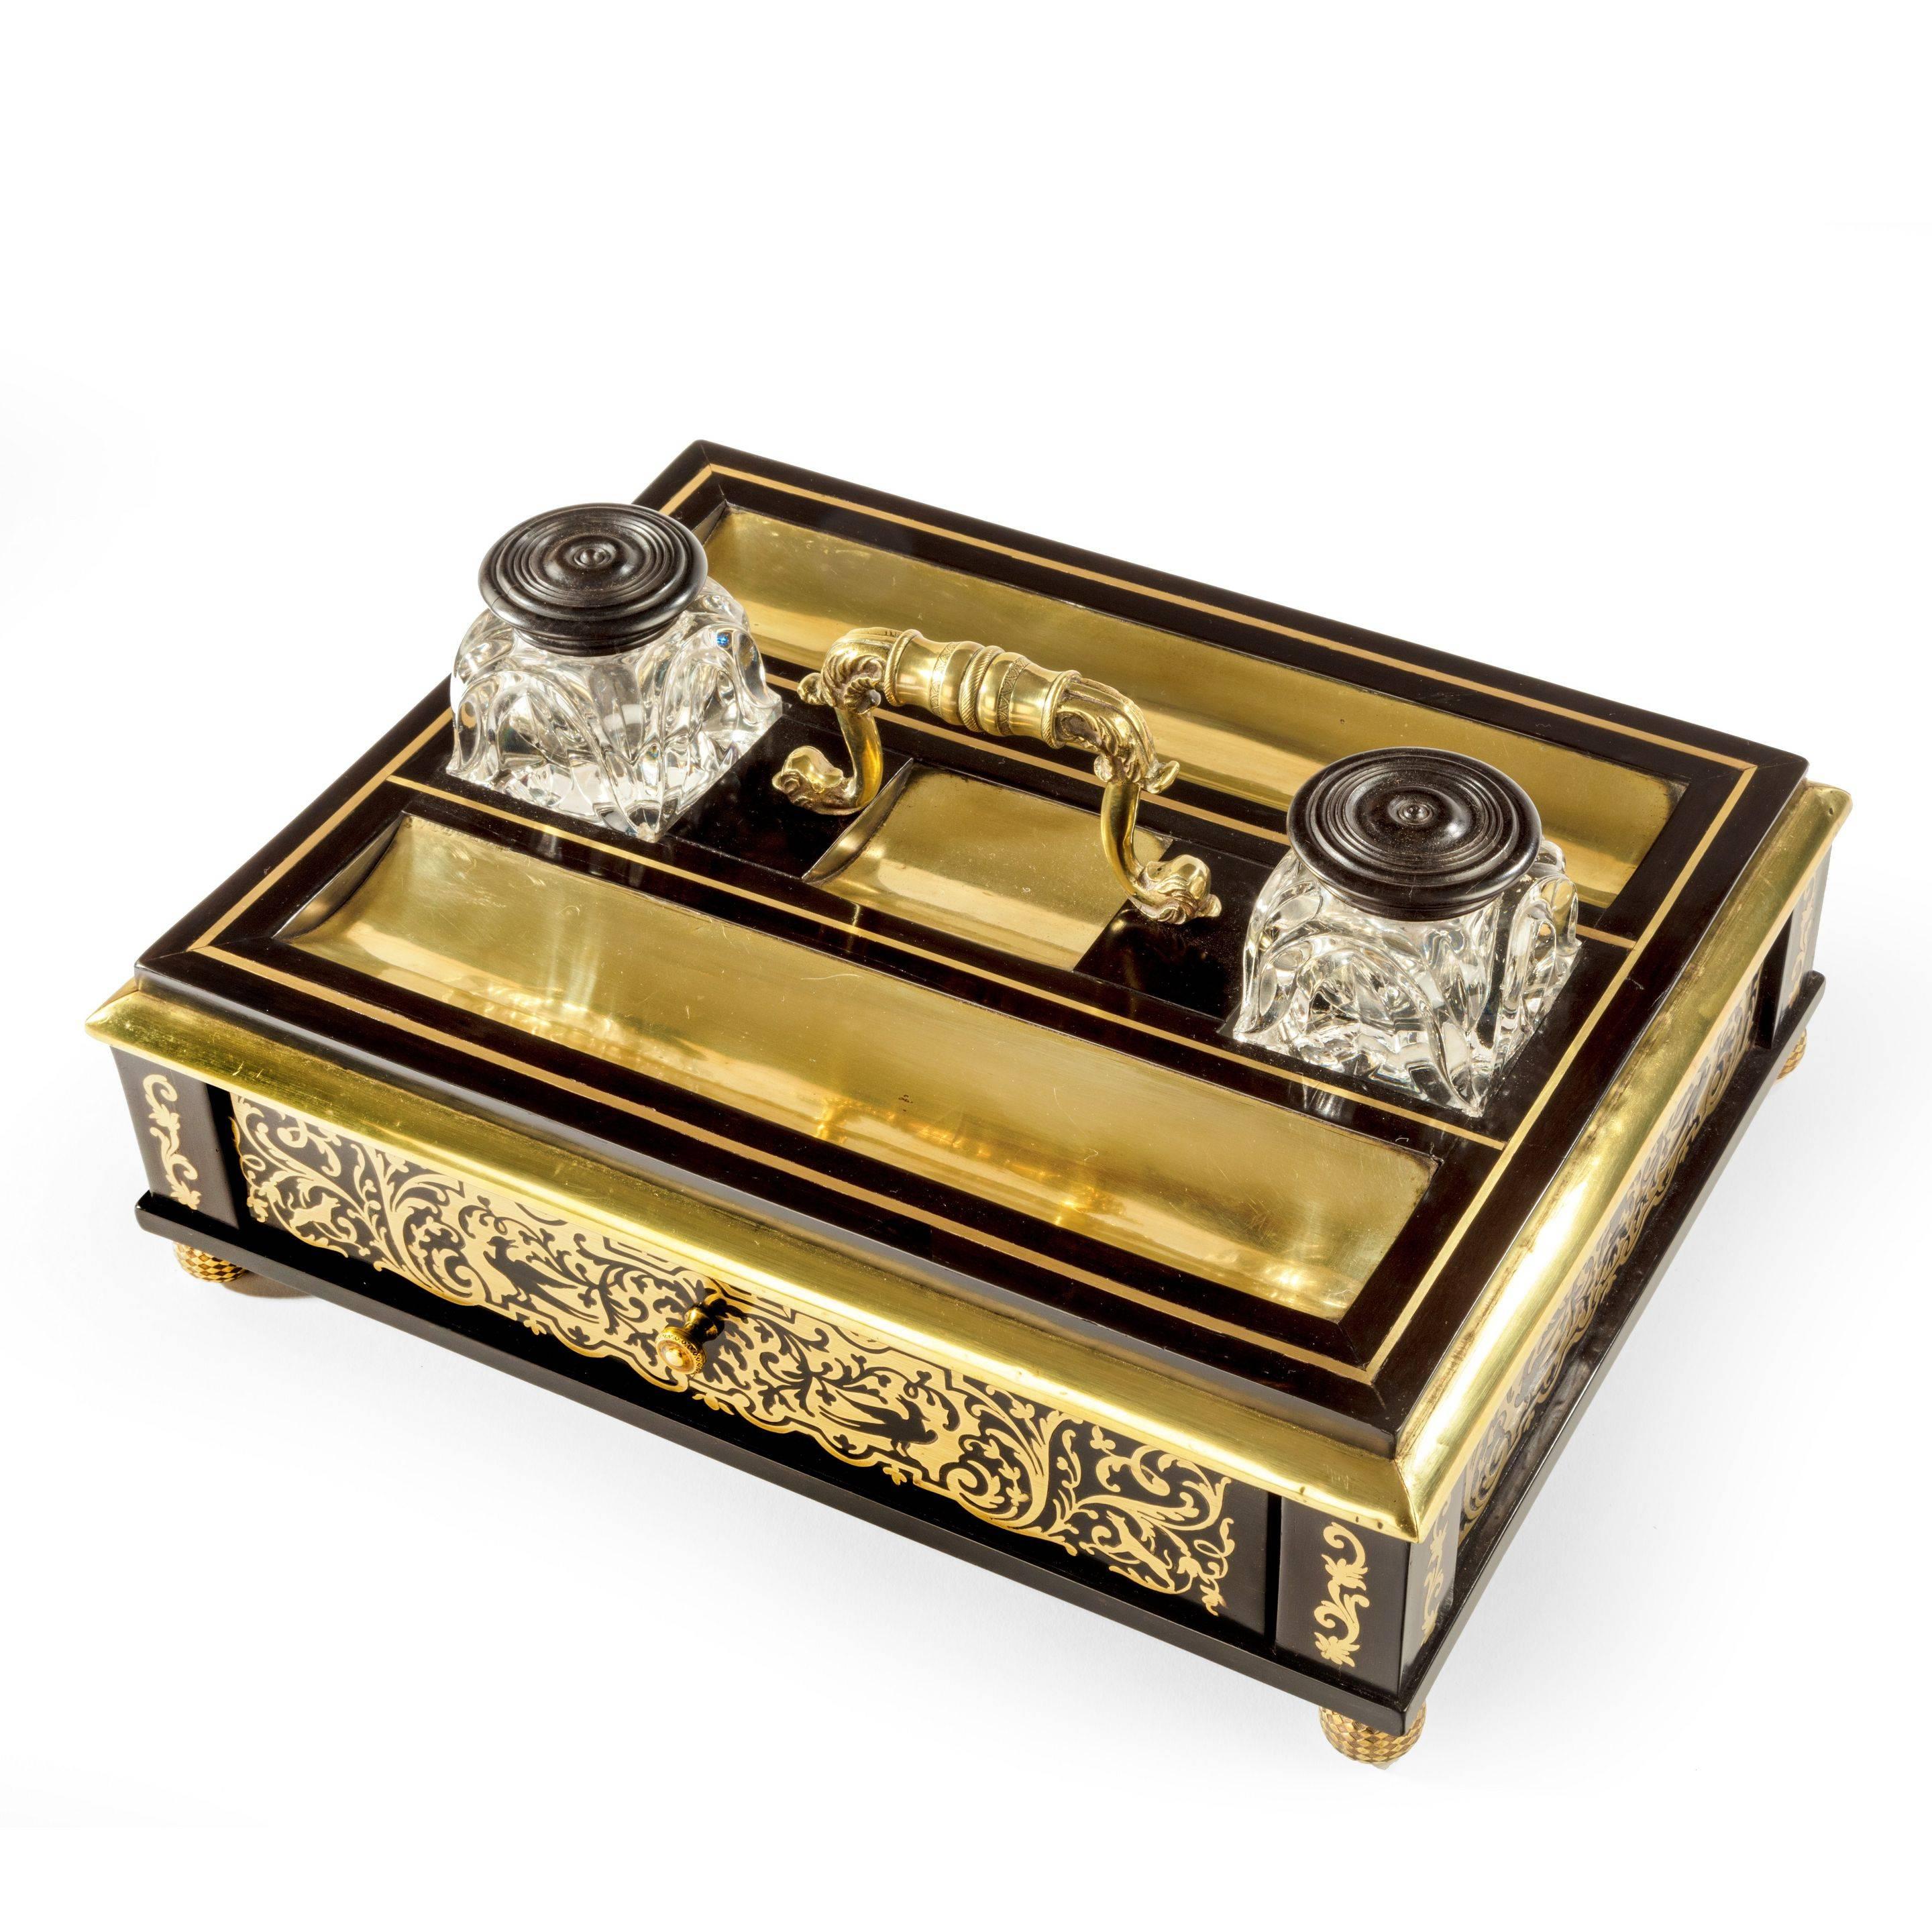 A Regency brass-inlaid ebony desk compendium of rectangular form with a
carrying handle flanked by cut glass inkwells between two pen trays, with a central drawer, set on bun feet, original key, an almost identical pen tray by W Leuchars was sold